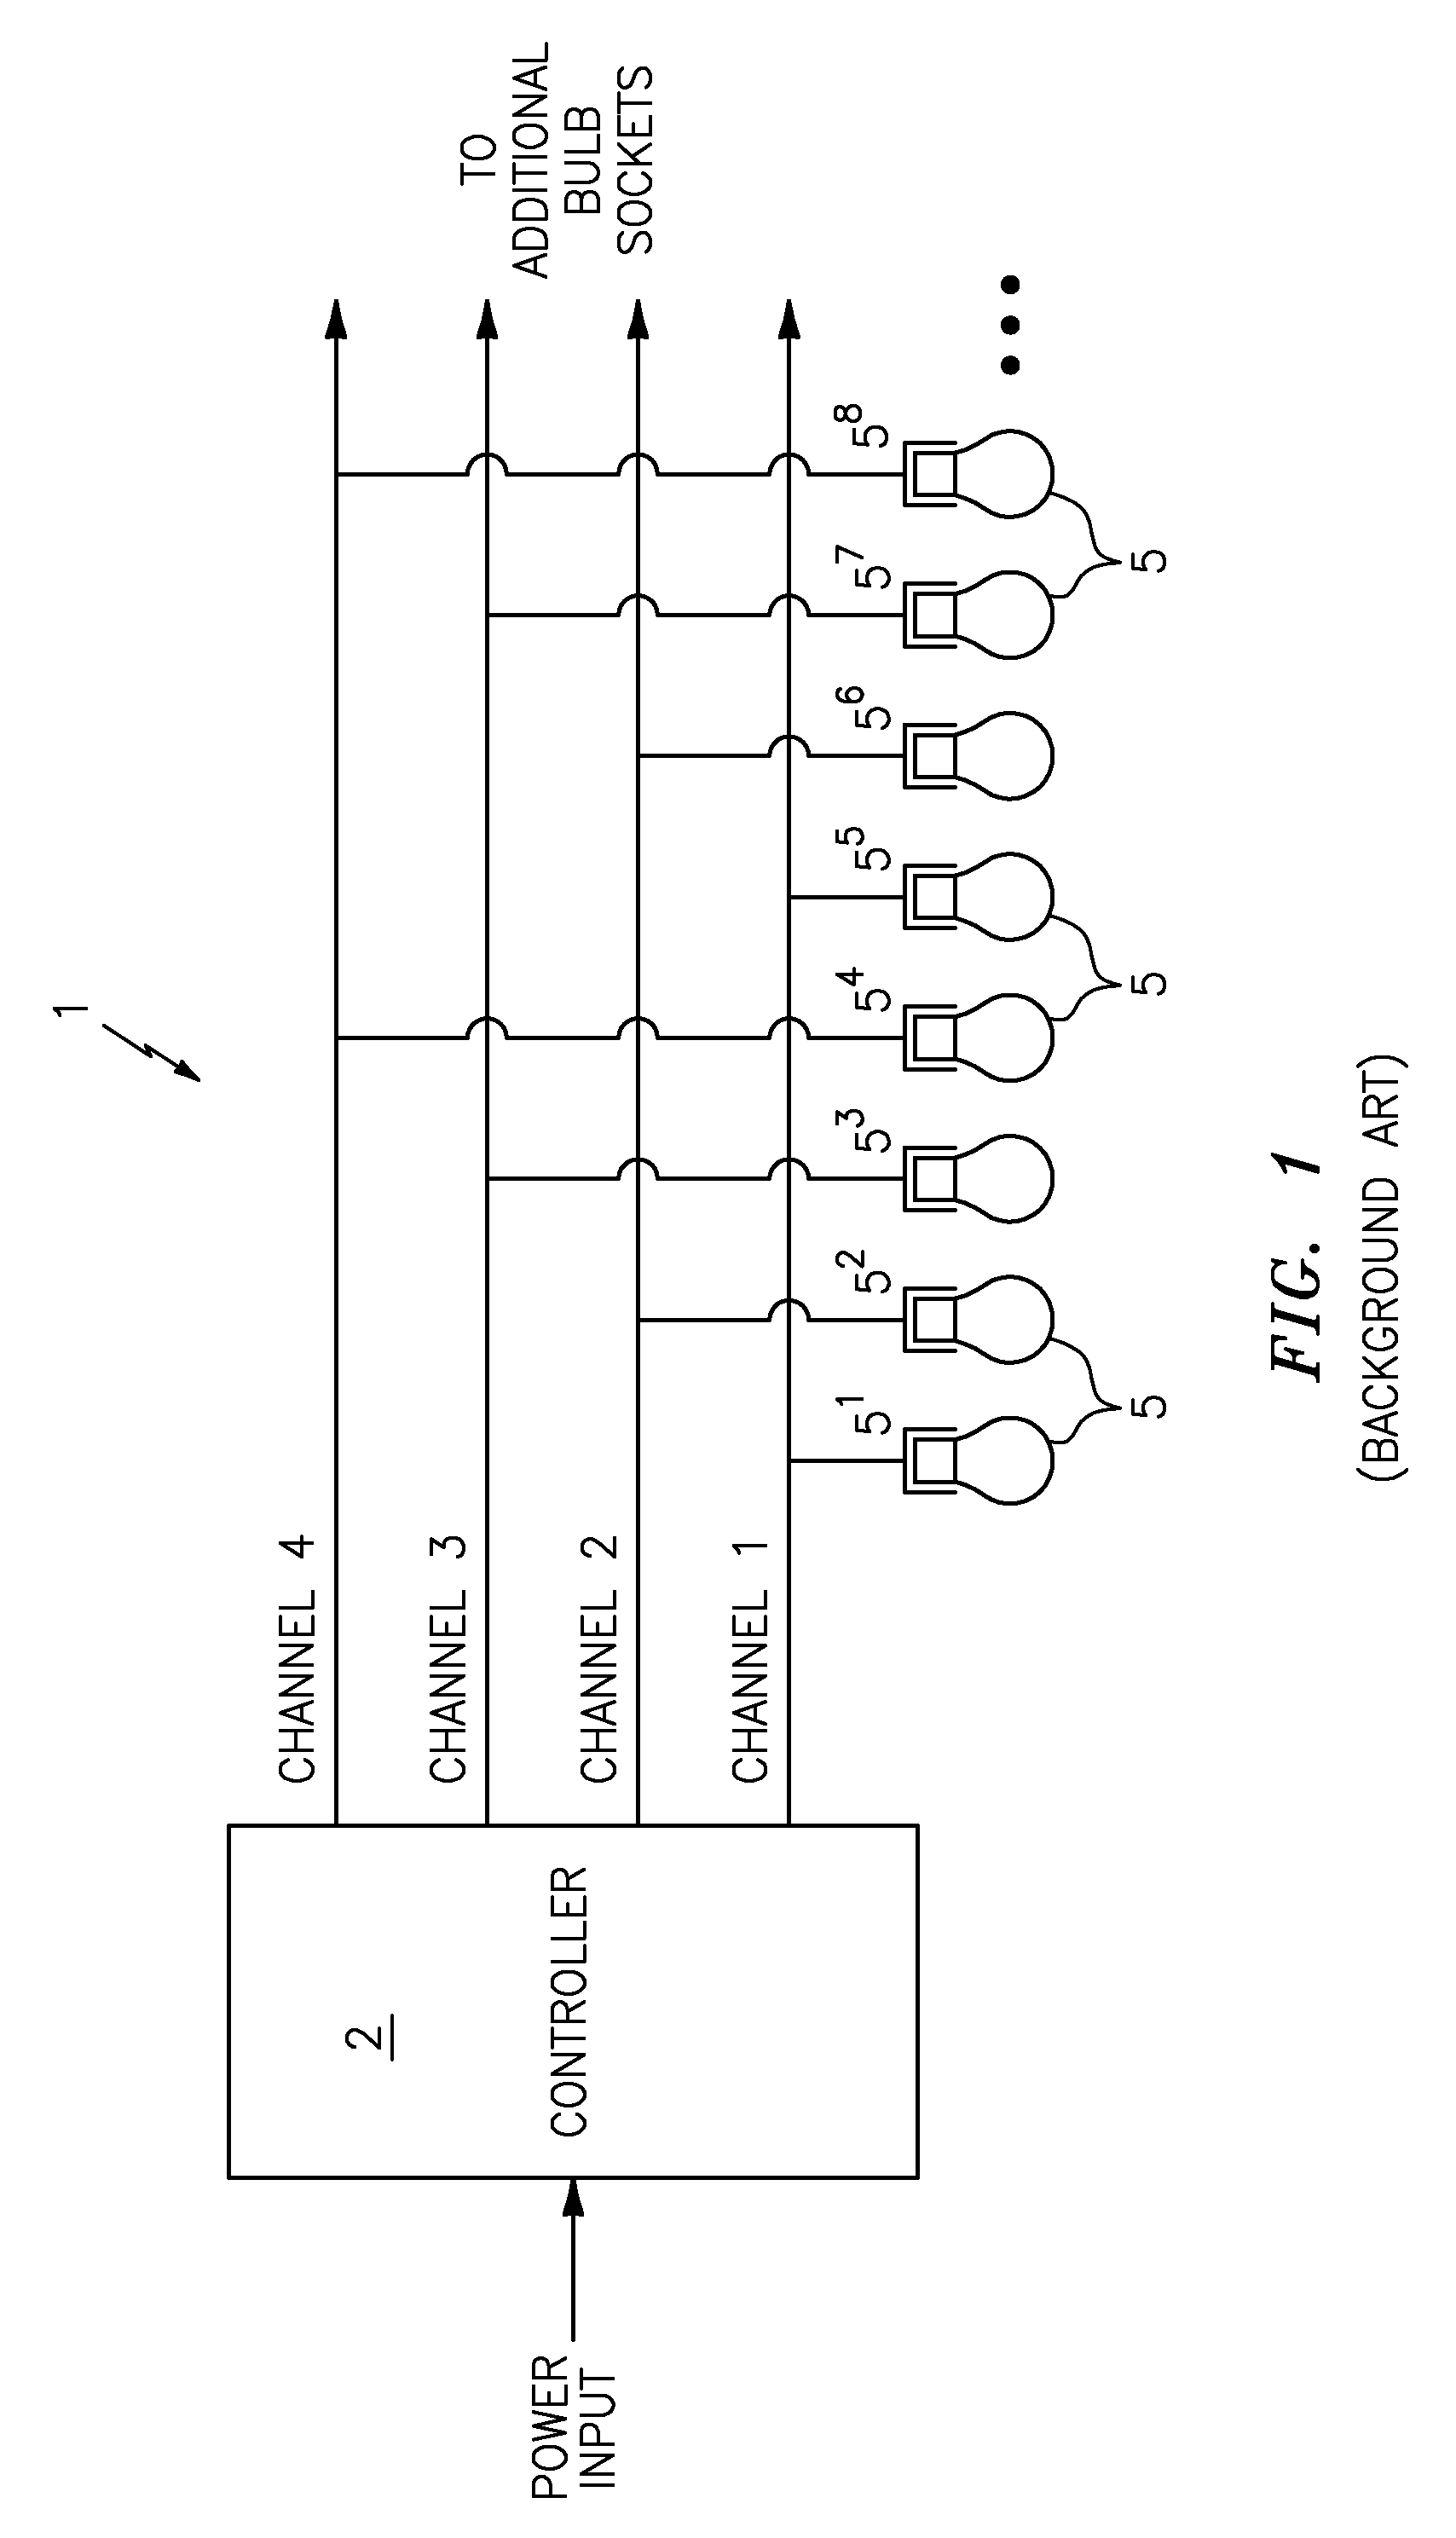 Programmable lighting effect device and system